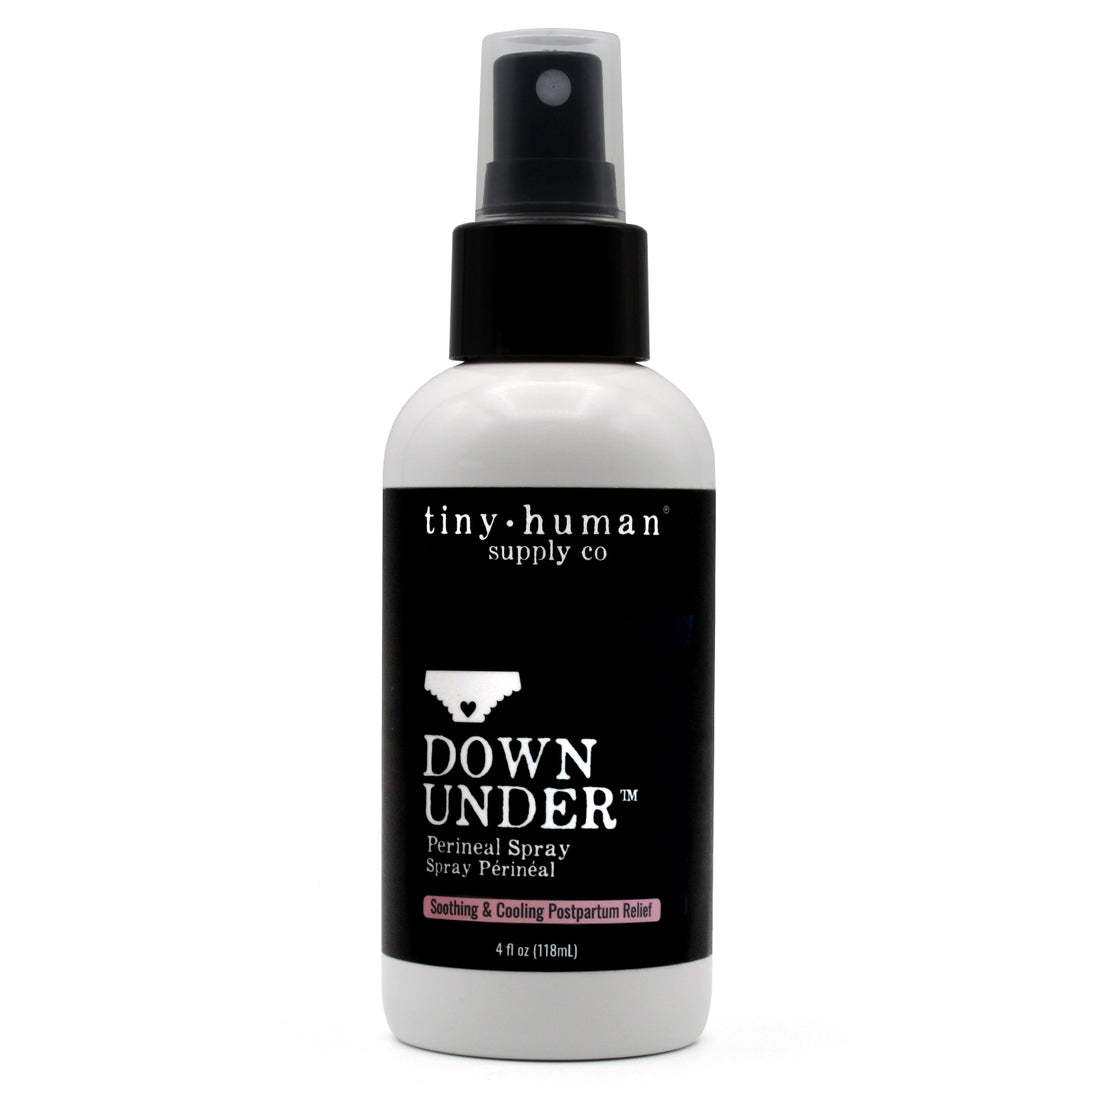 Tiny Human Supply Co. Down Under Perineal Spray - Cooling Postpartum Relief (Final Sale)